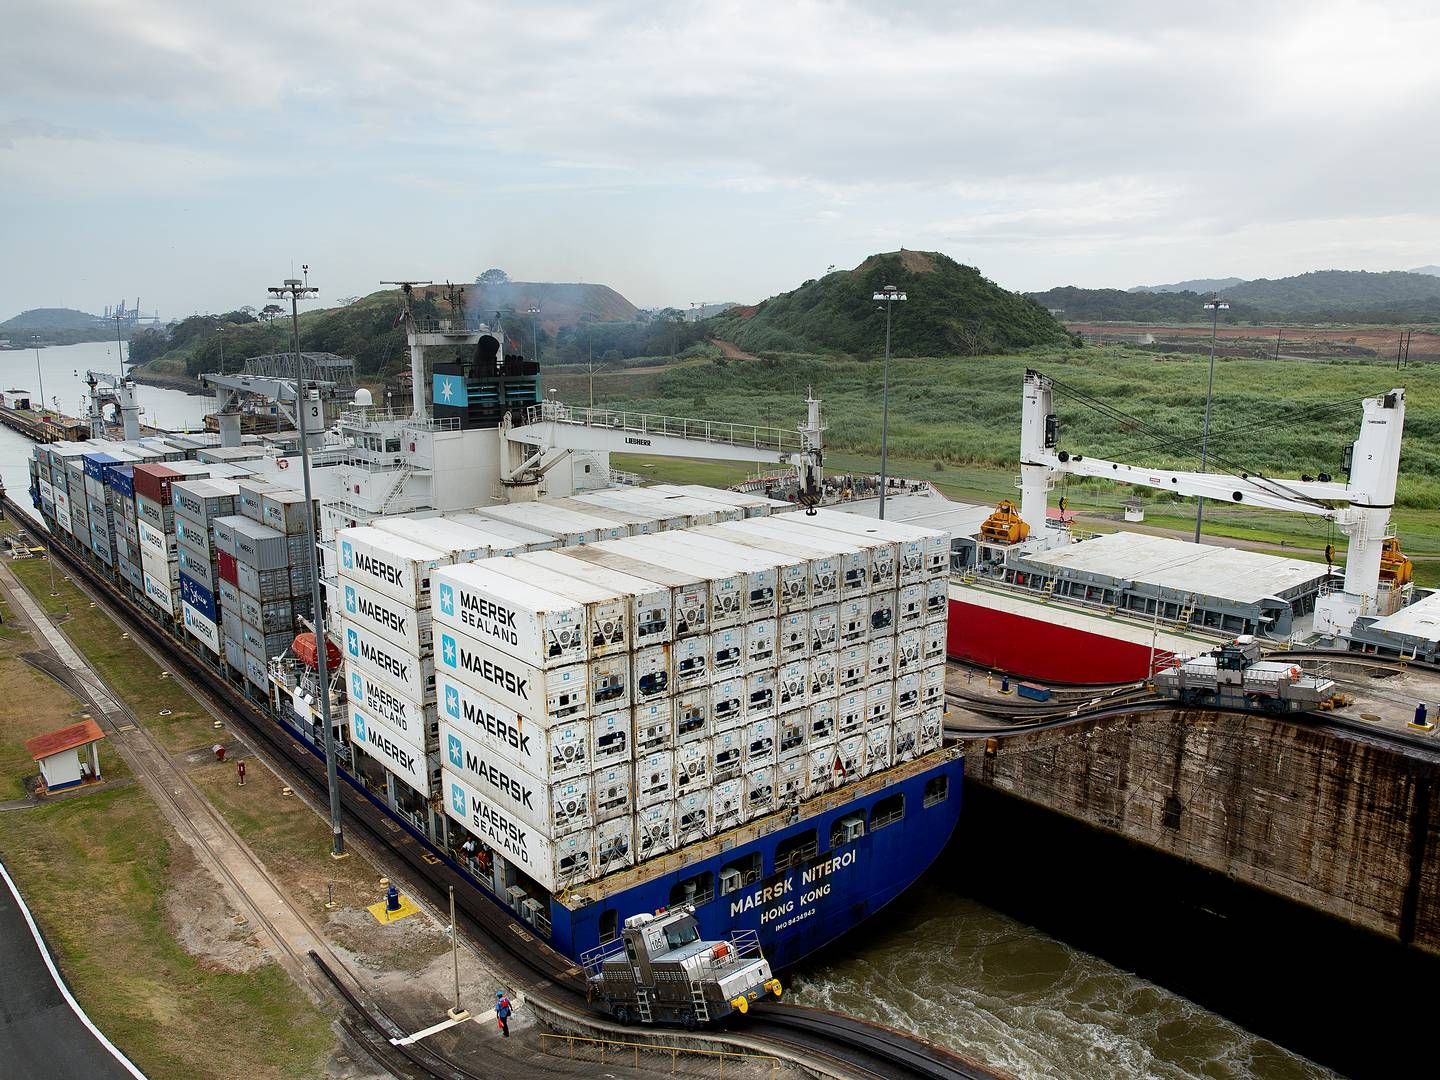 The reduction in the number of transits in the canal will lead to longer journeys on other routes and possibly a shift to larger ship segments, according to Poten & Partners. | Photo: Thomas Borberg/Politiken/Ritzau Scanpix